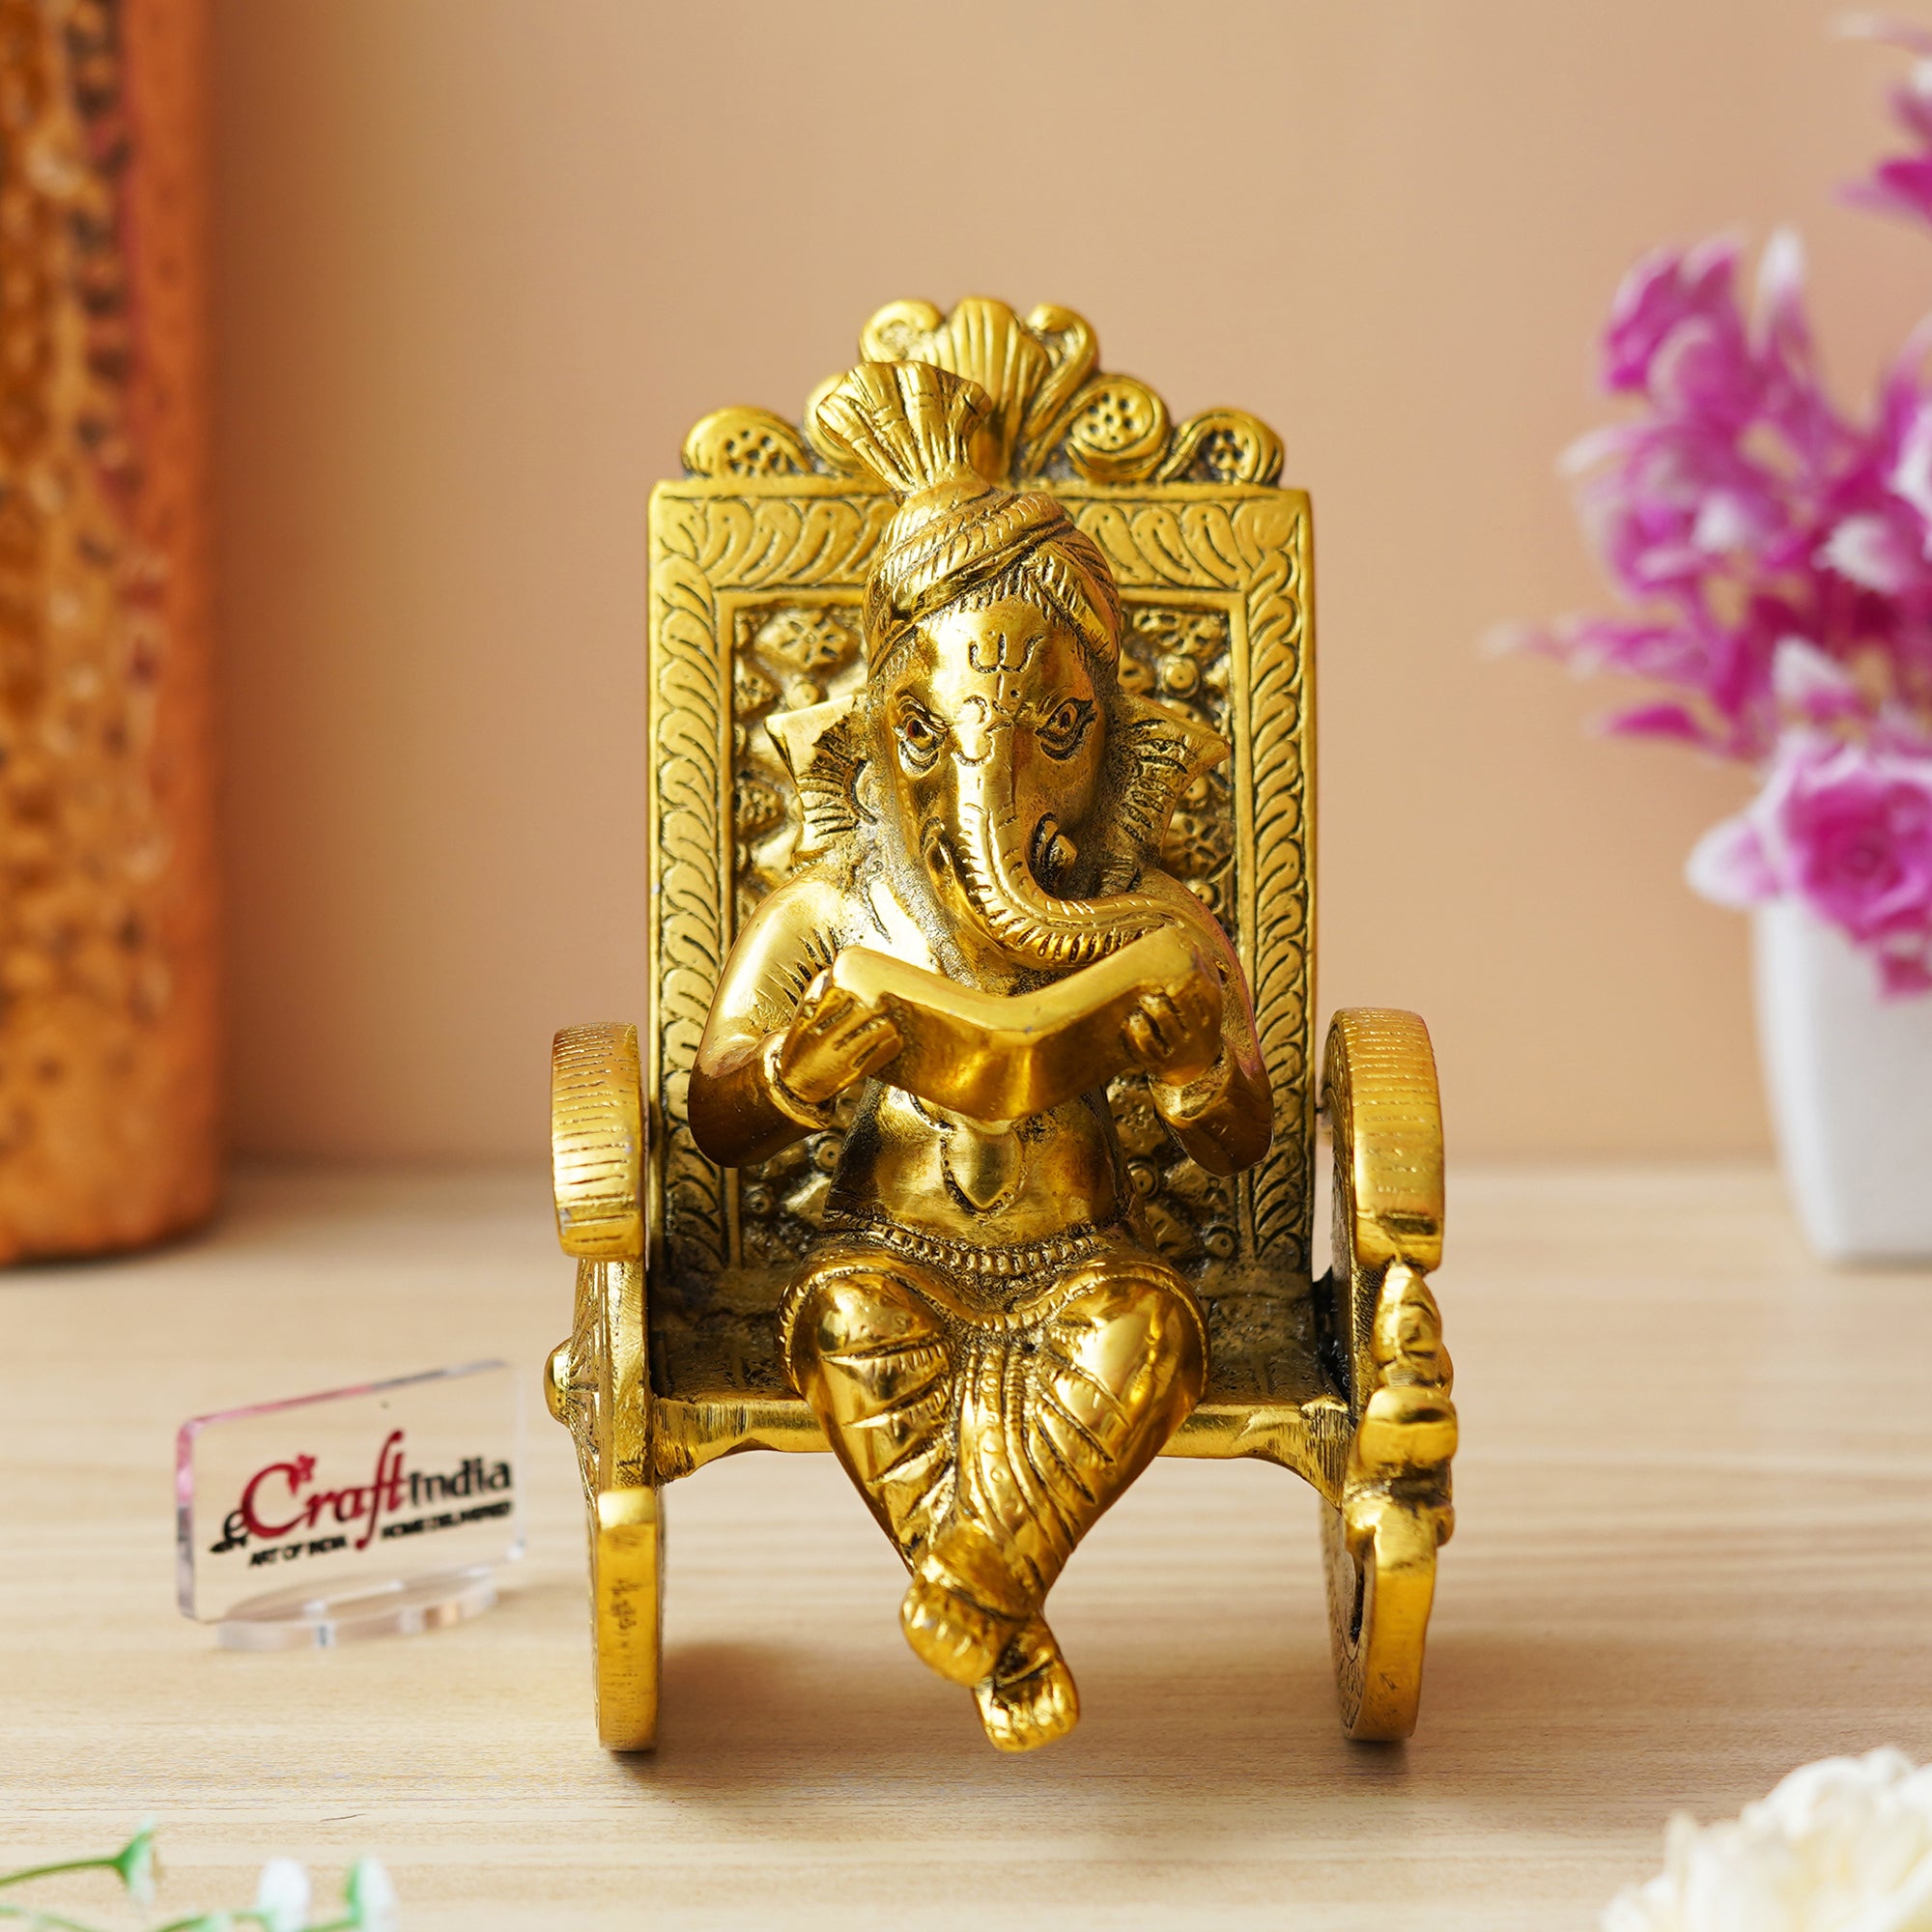 Golden Metal Handcrafted Lord Ganesha Idol Reading Book on Rocking Chair 4